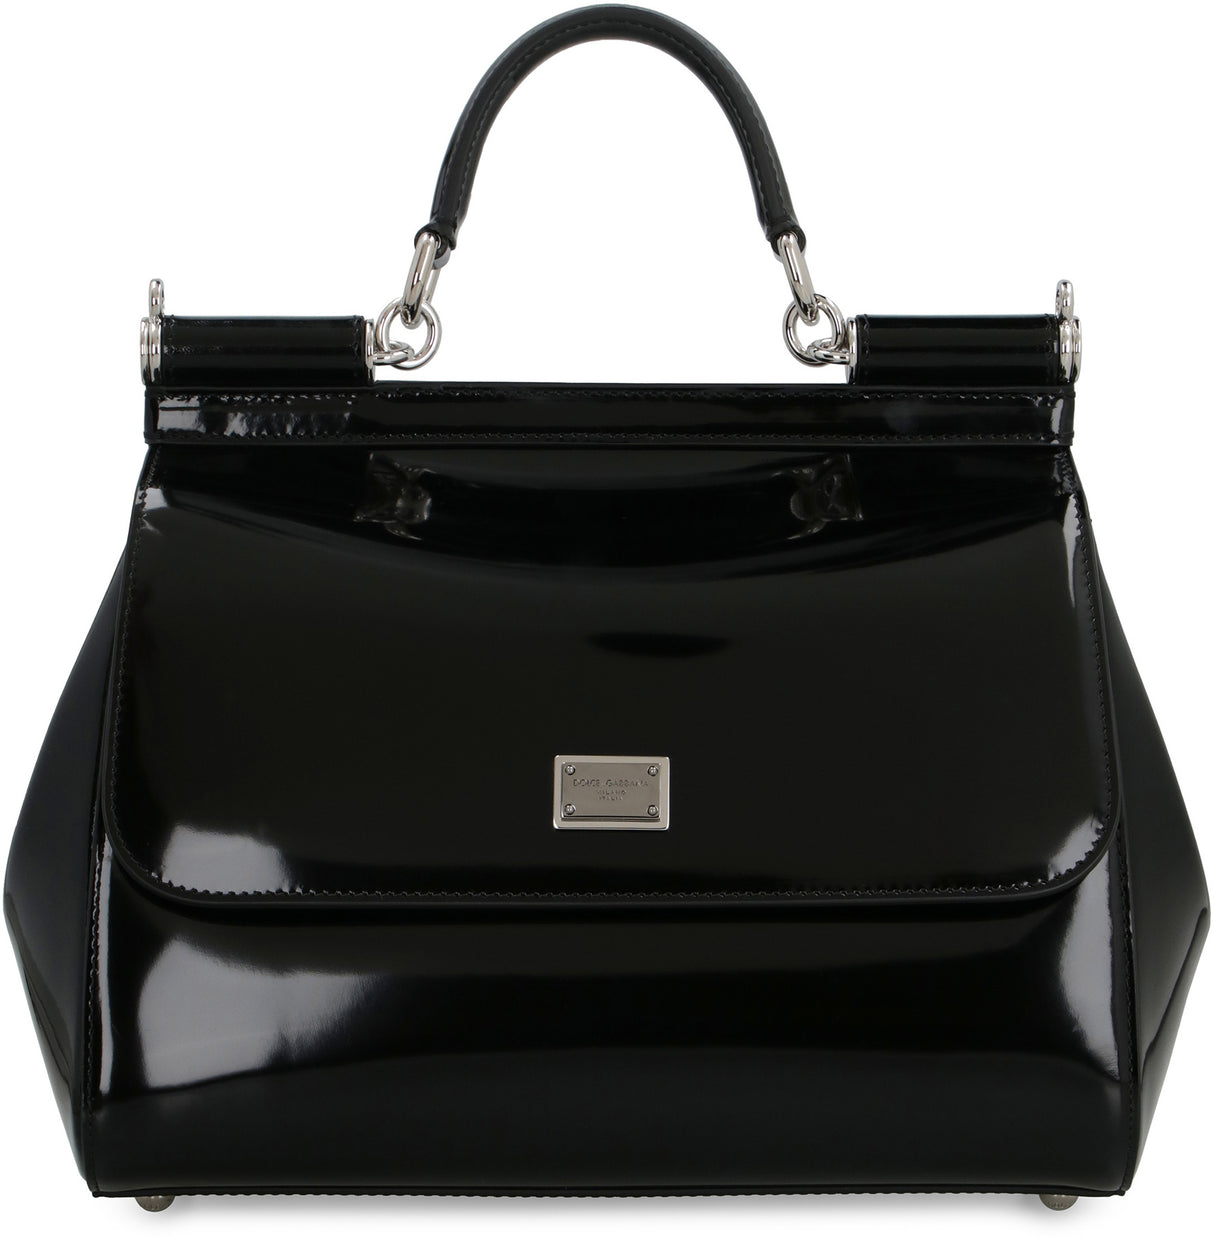 DOLCE & GABBANA Black Leather Tote Handbag for Women - SS23 Collection